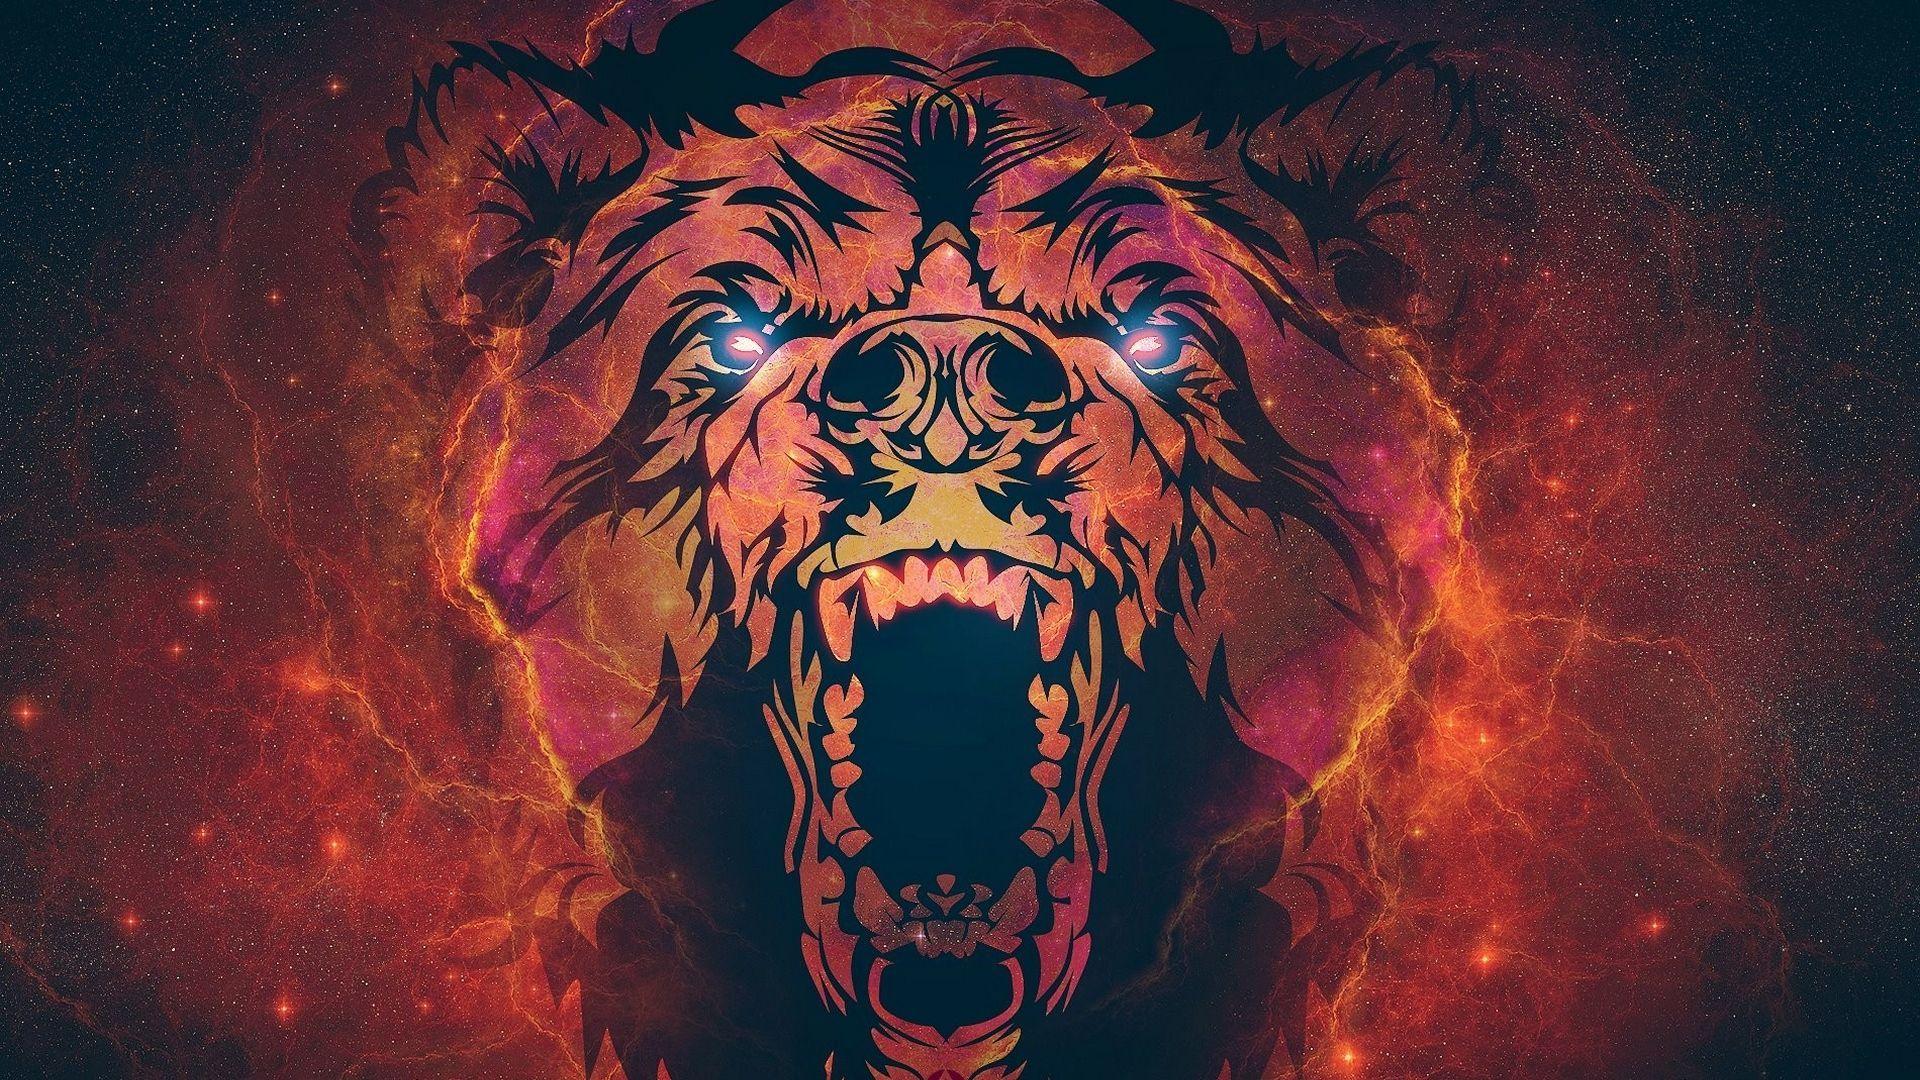 Bear Art Wallpaper Background. Quick Saves in 2019